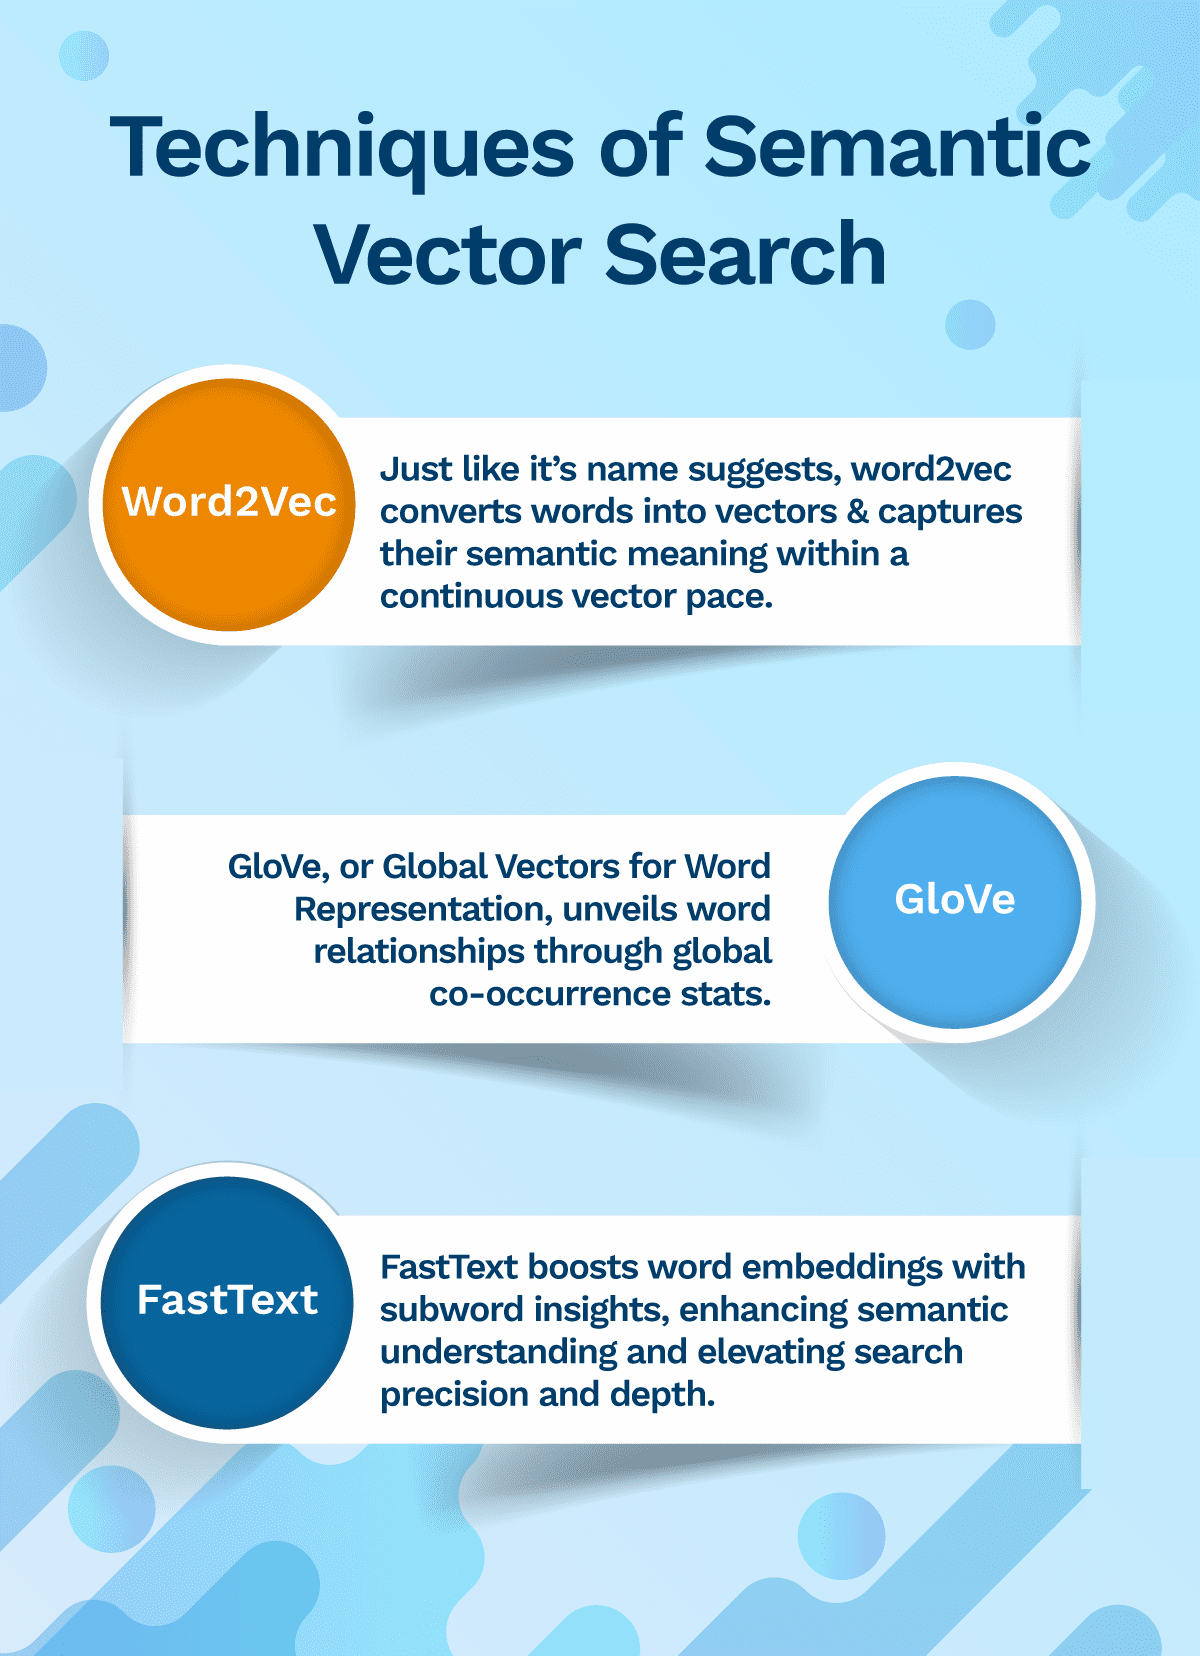 How Semantic Vector Search Transforms Customer Support Interactions